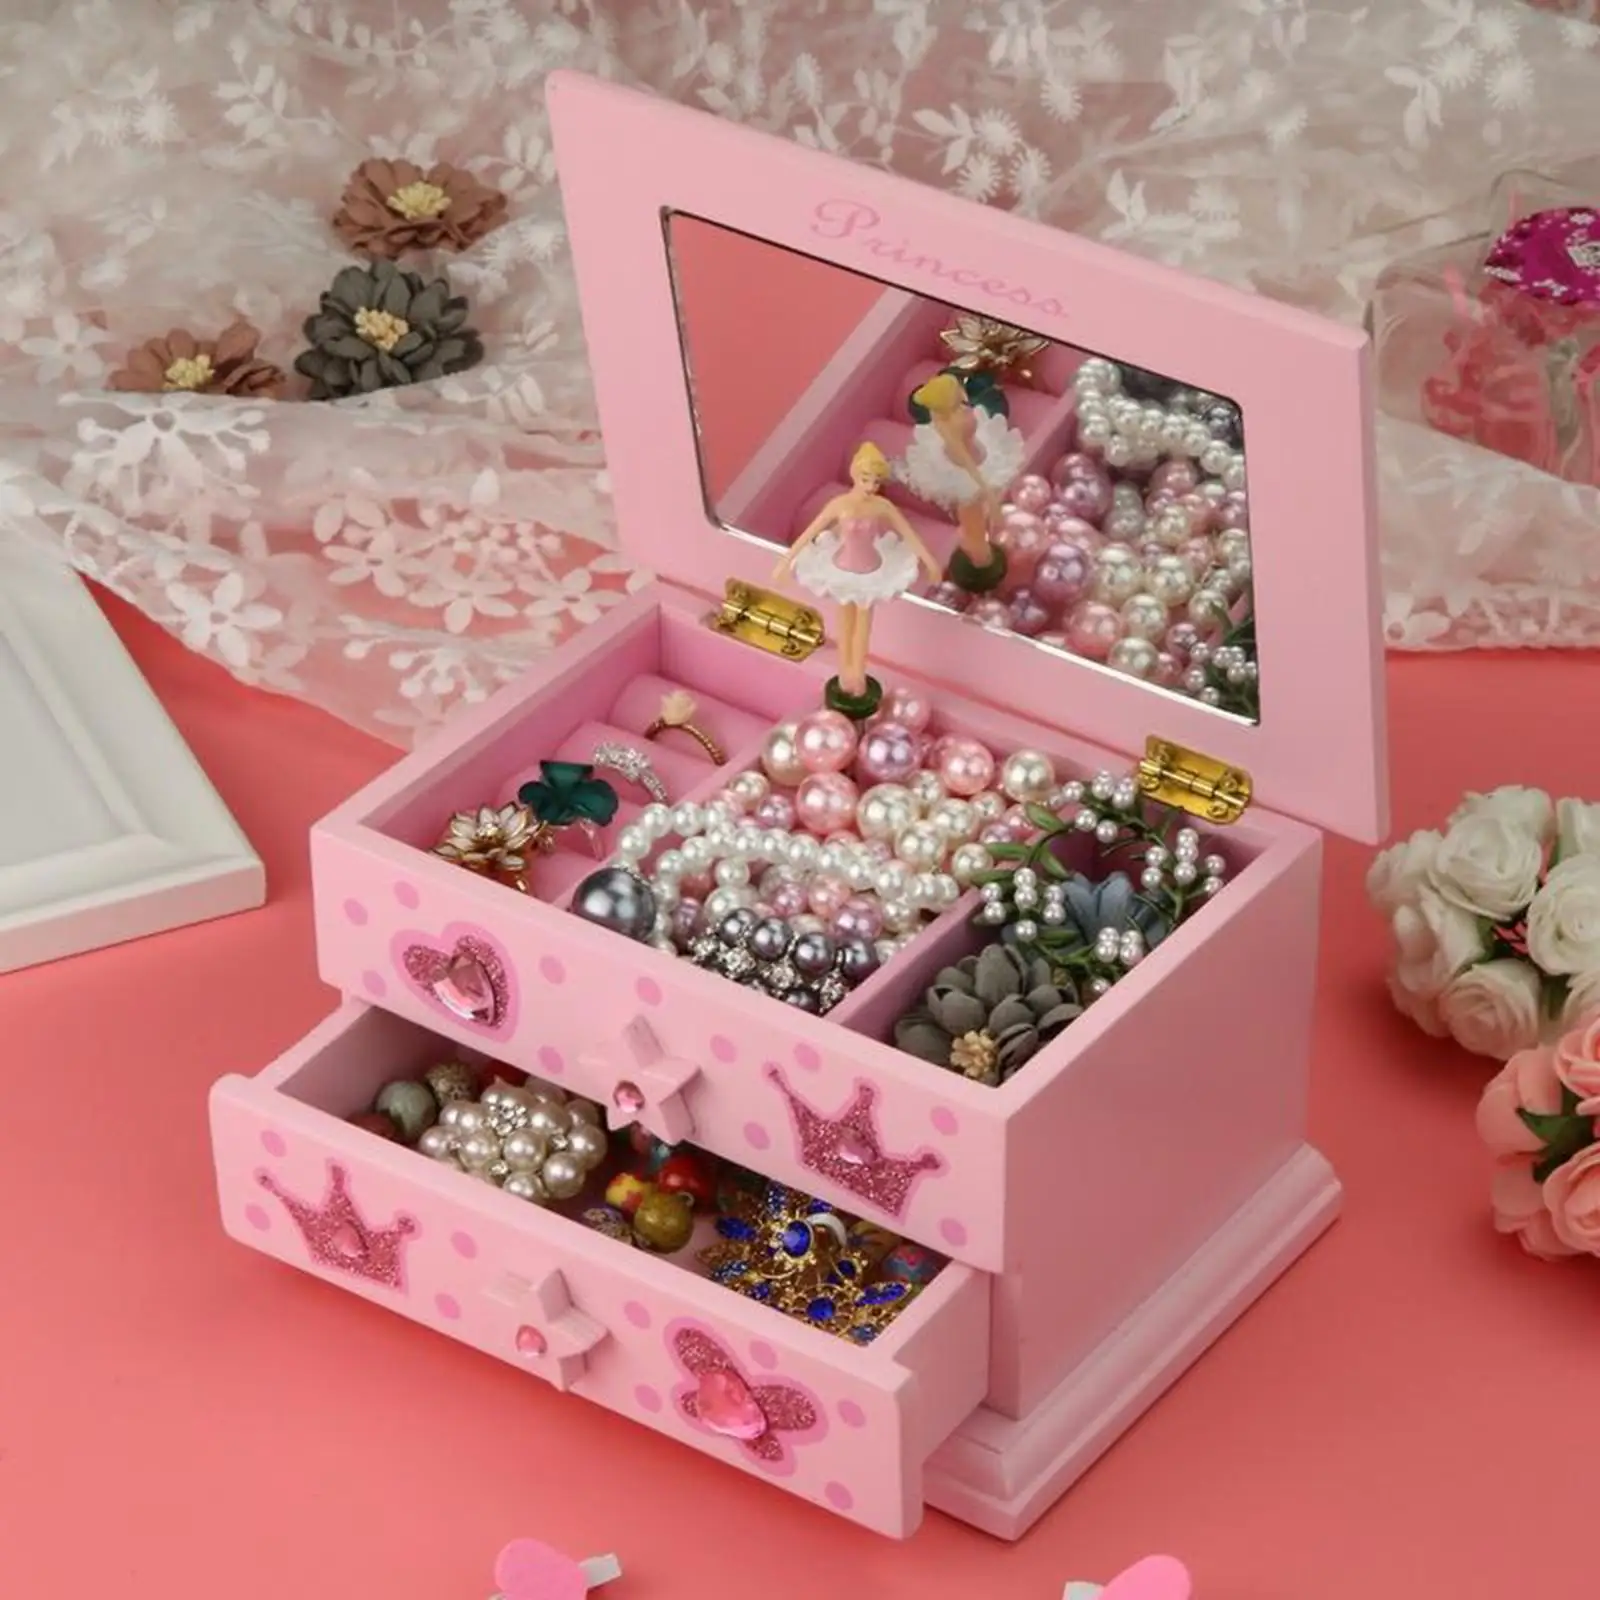 Pink Princess Music Jewelry Box Ring Earrings Bracelets Storage Compartment Organizer Case Decorative Day Musical Box